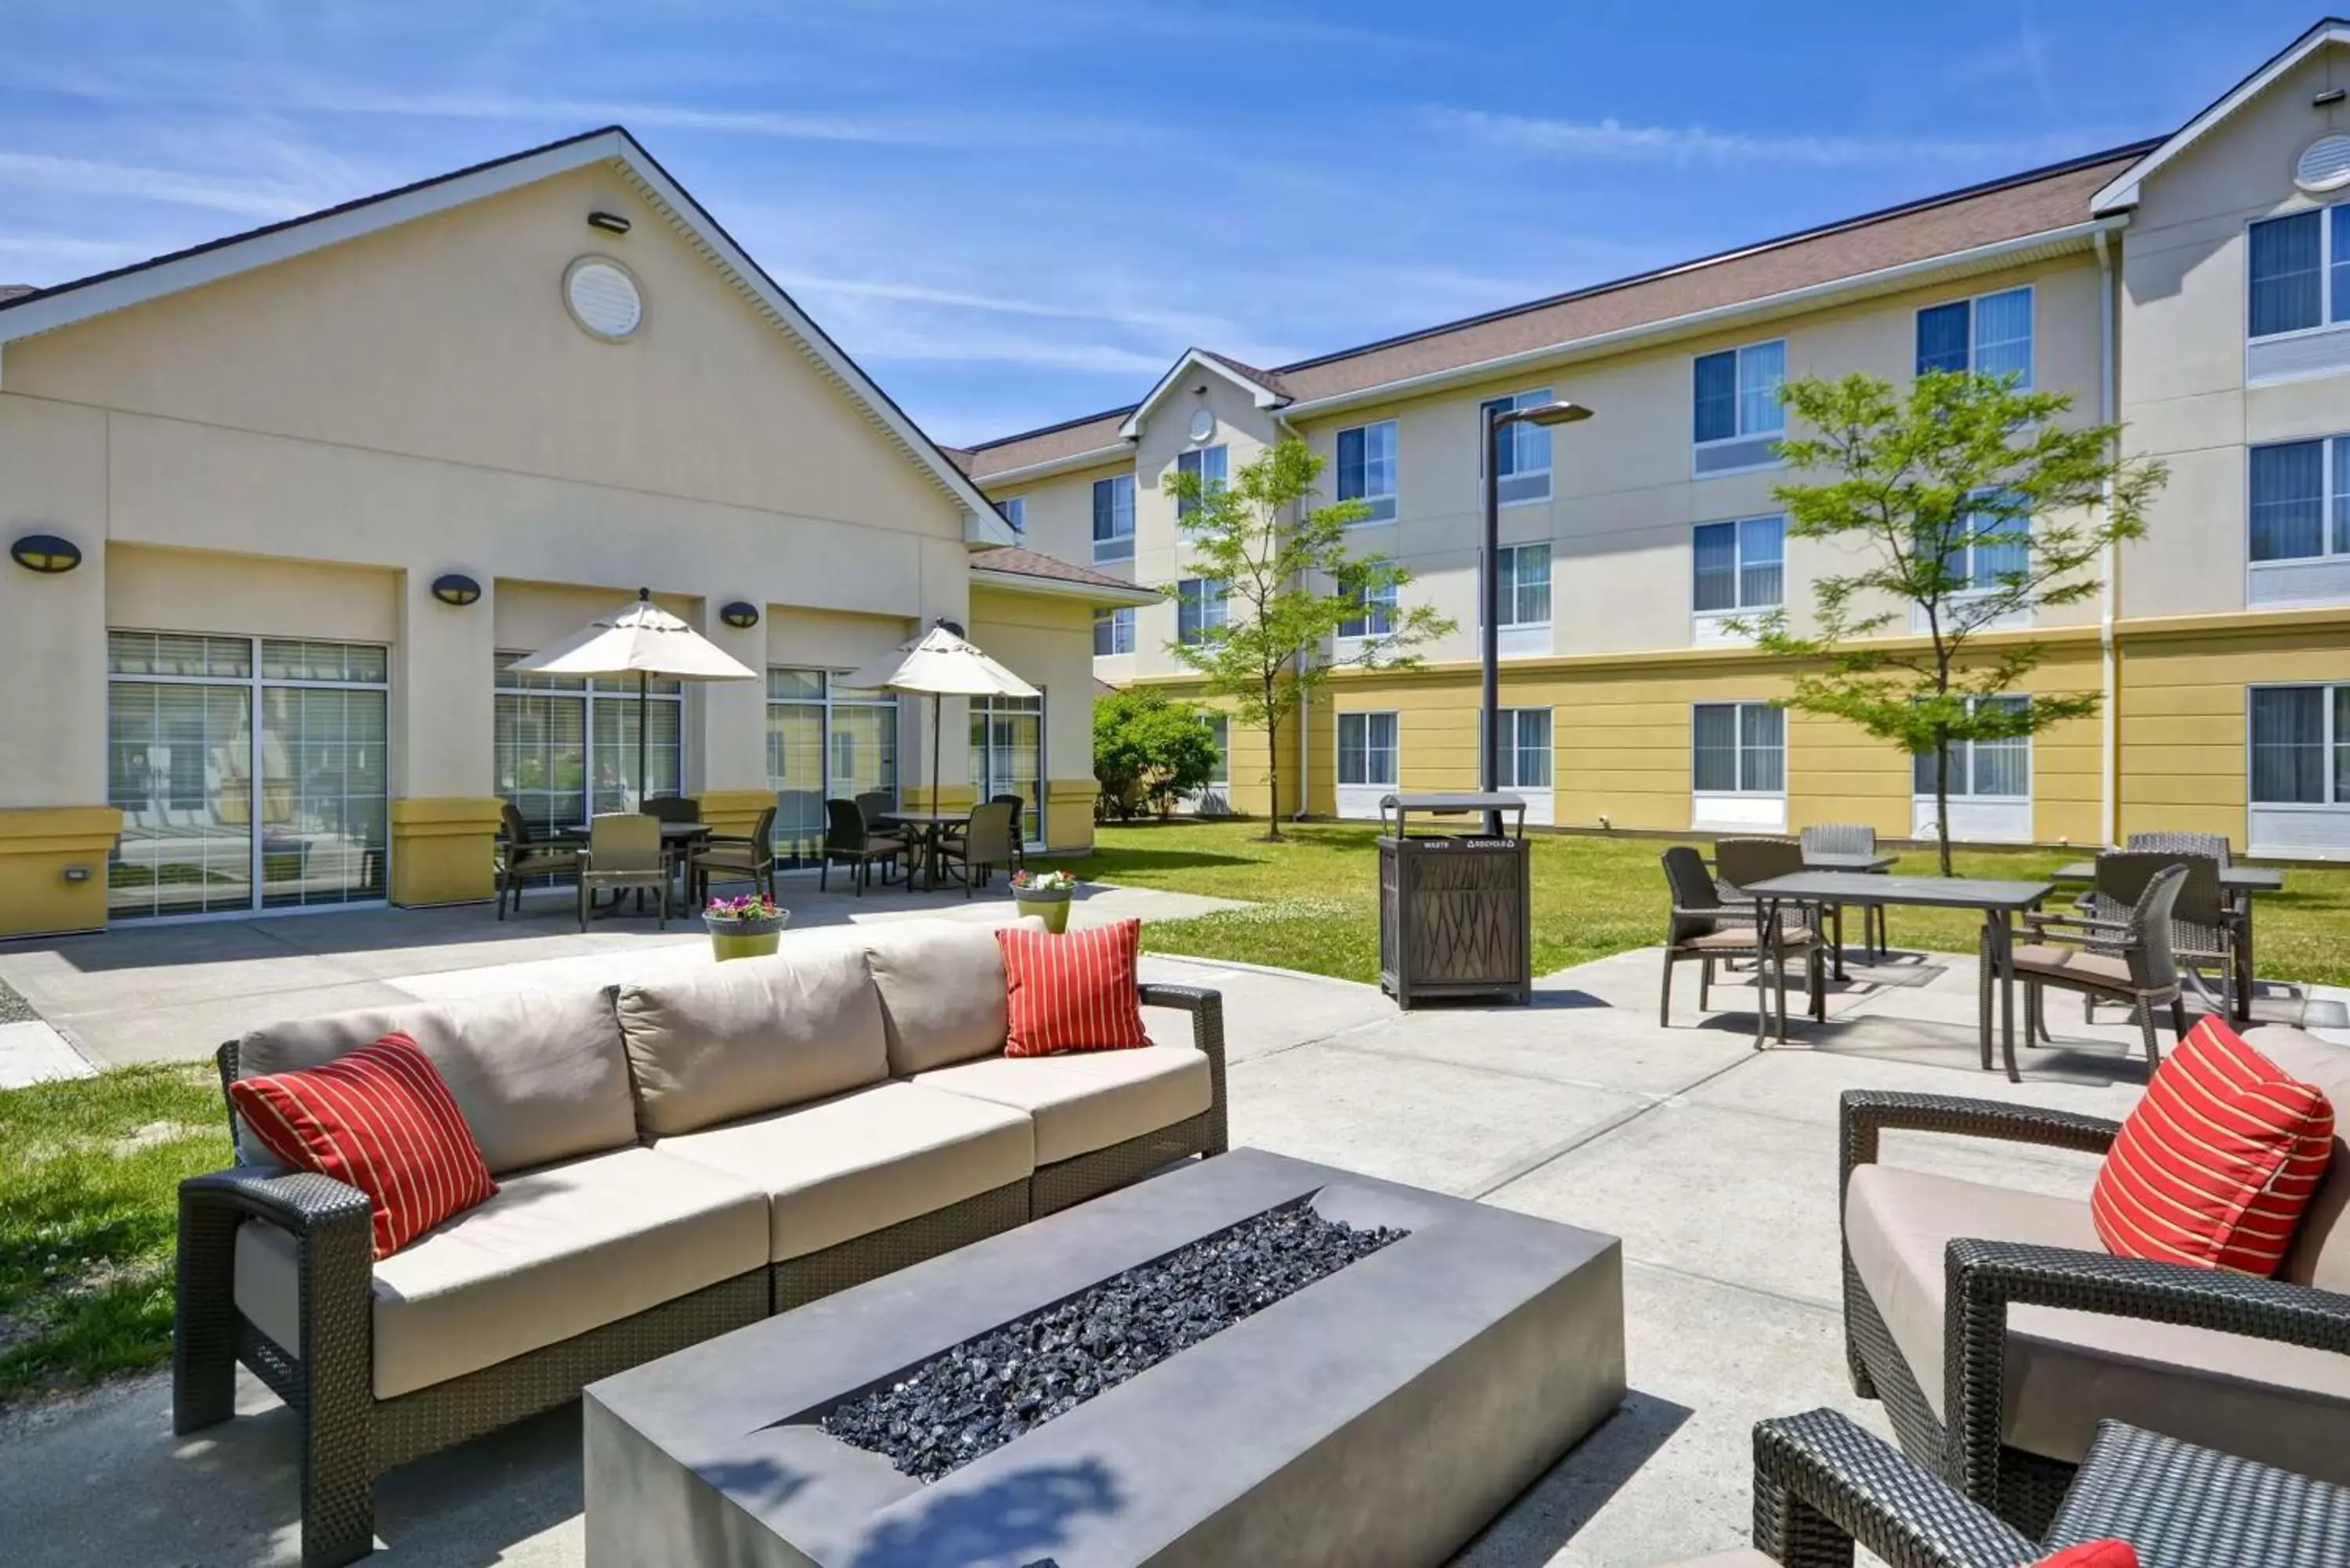 Patio, Property Building in The Homewood Suites by Hilton Ithaca